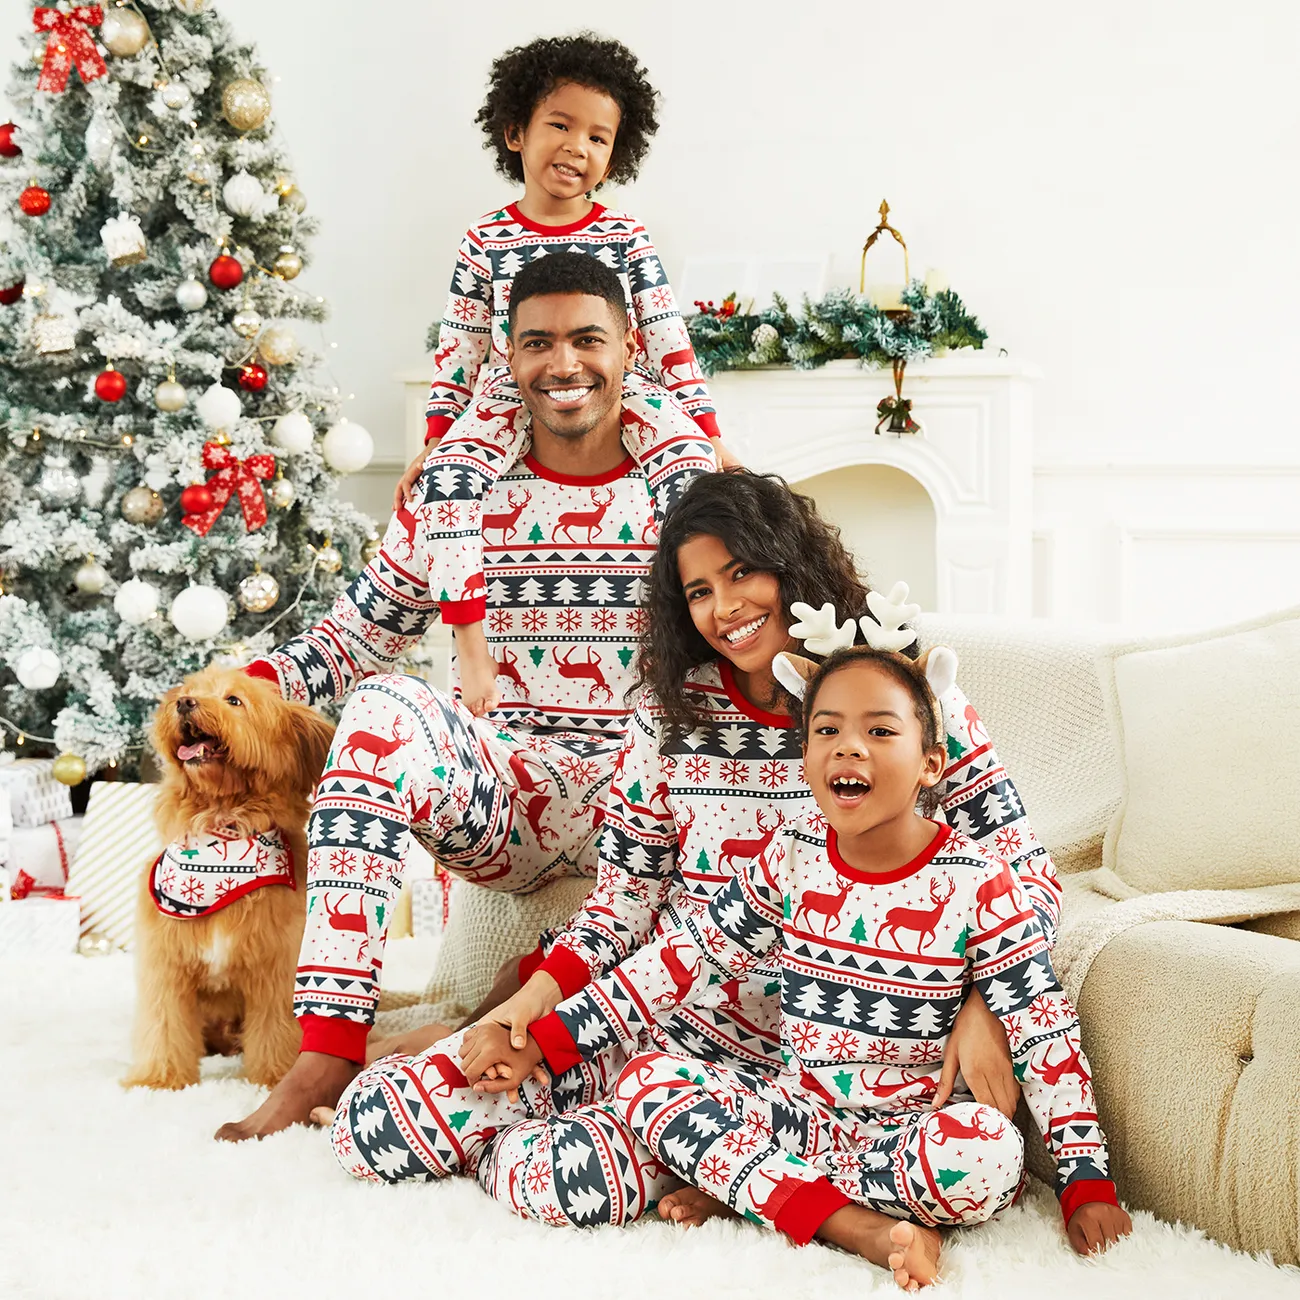 Christmas All Over Reindeer Print Family Matching Long-sleeve Pajamas Sets (Flame Resistant) Red/White big image 1